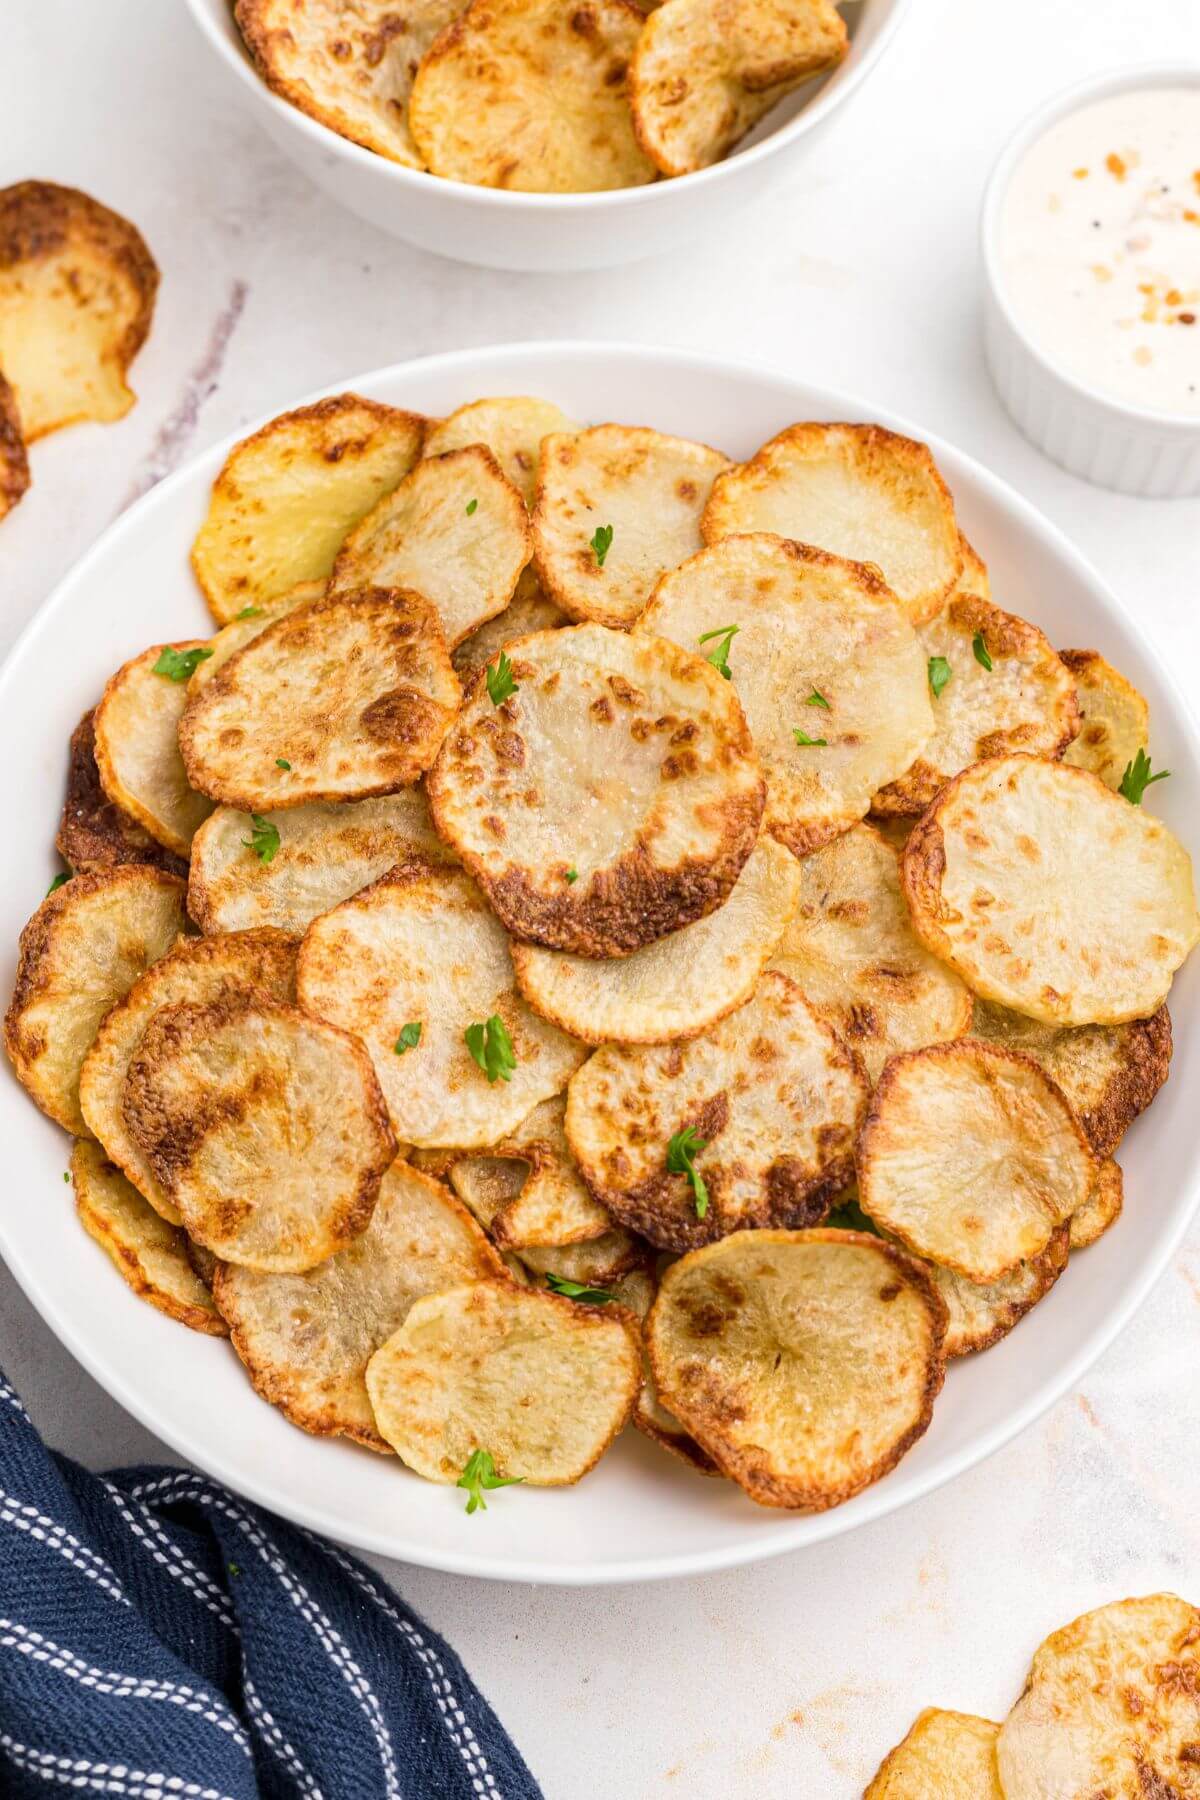 Golden yellow crispy potato chips stacked in a white bowl.